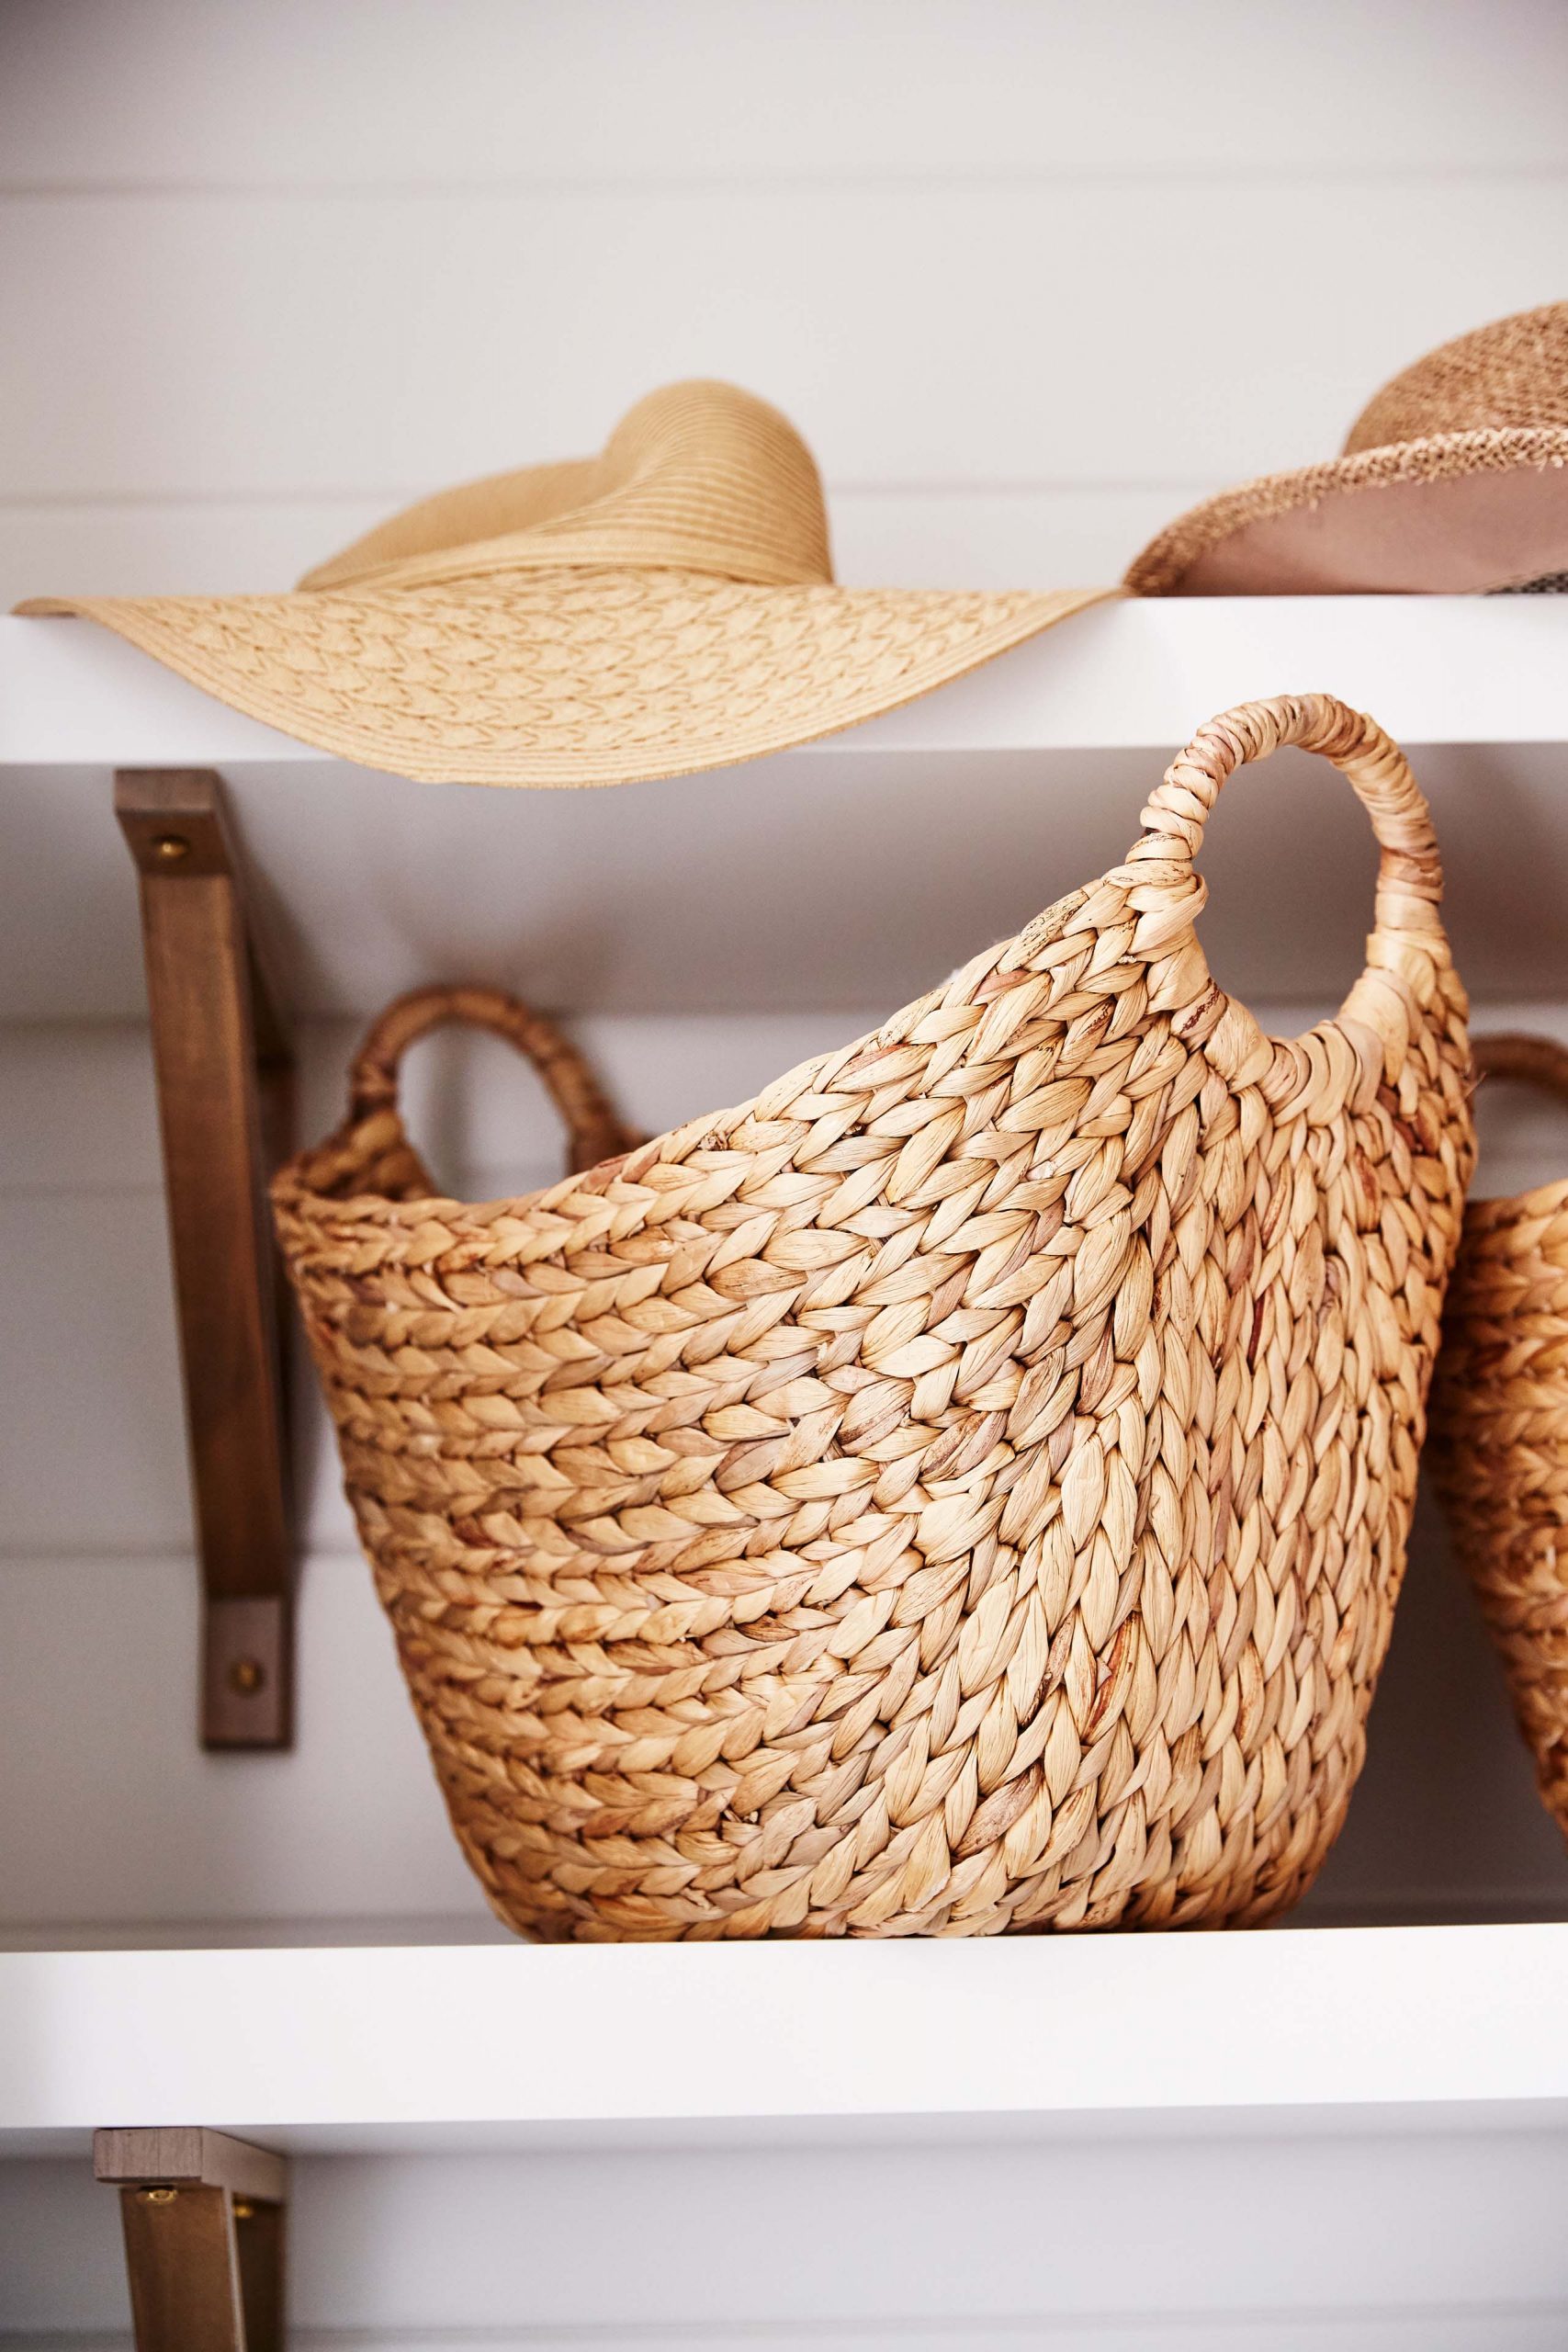 Baskets are a surefire way to keep any mudroom looking neat and organized.